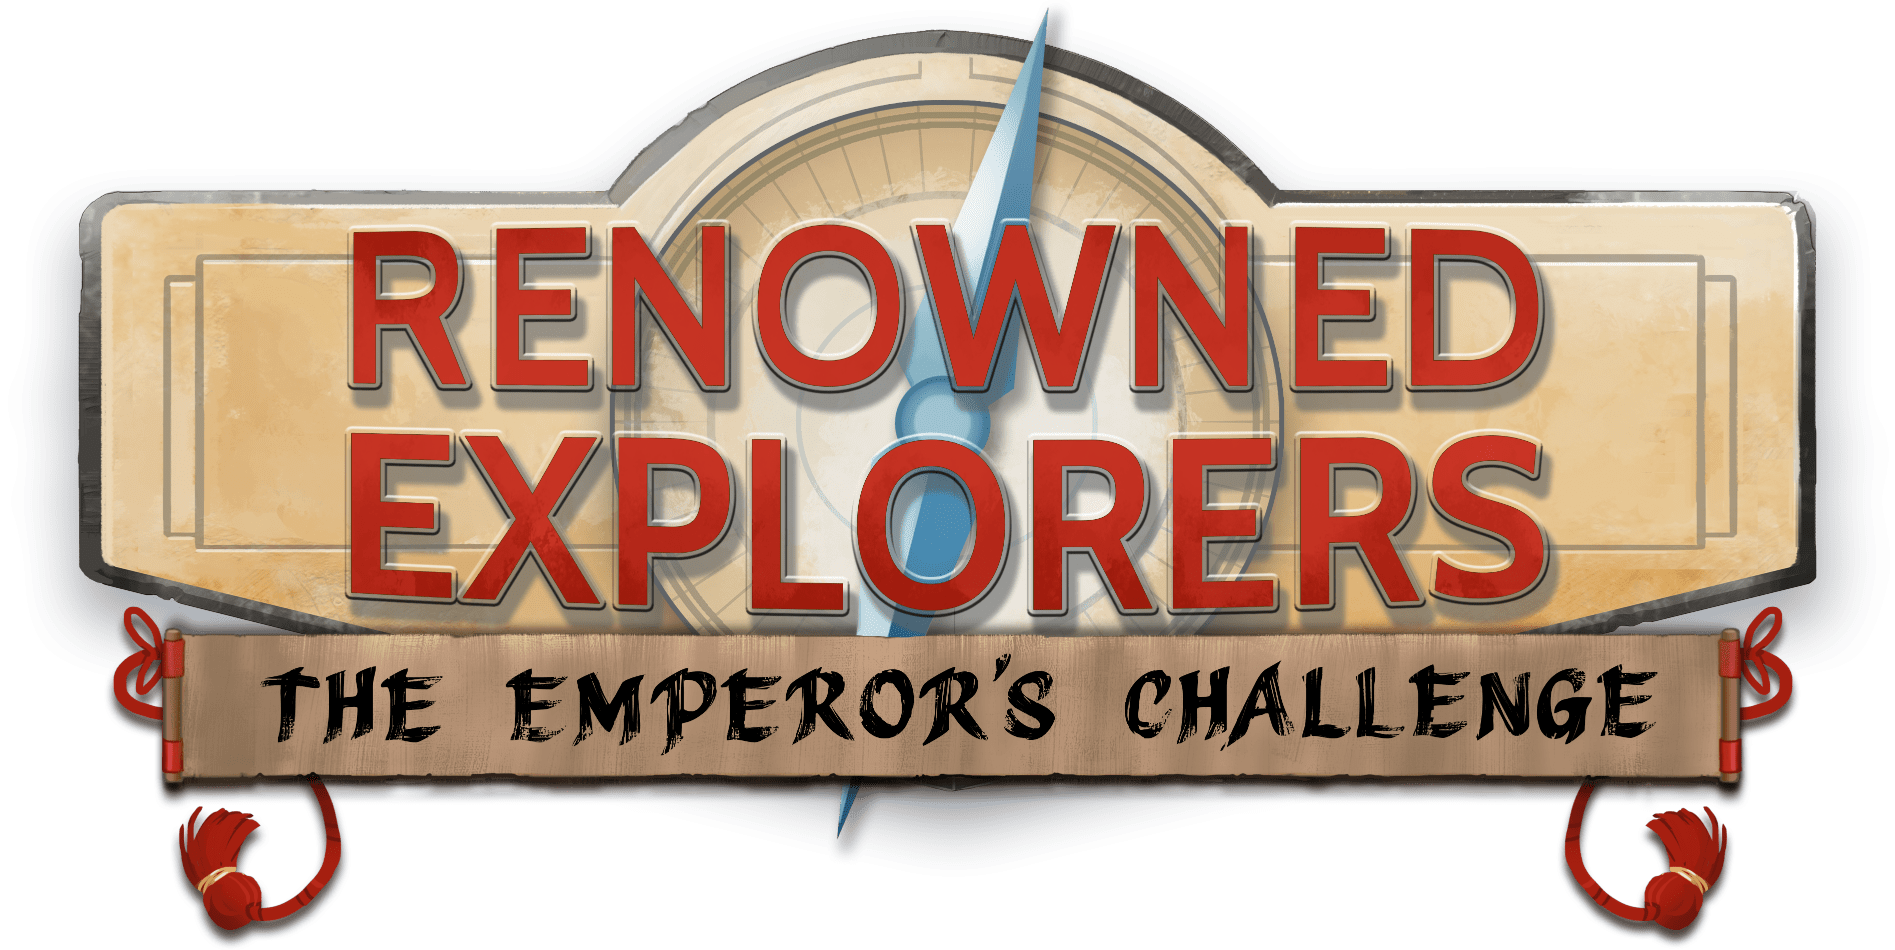 Renowned Explorers: The Emperor’s Challenge Review – Let’s Go Exploring!